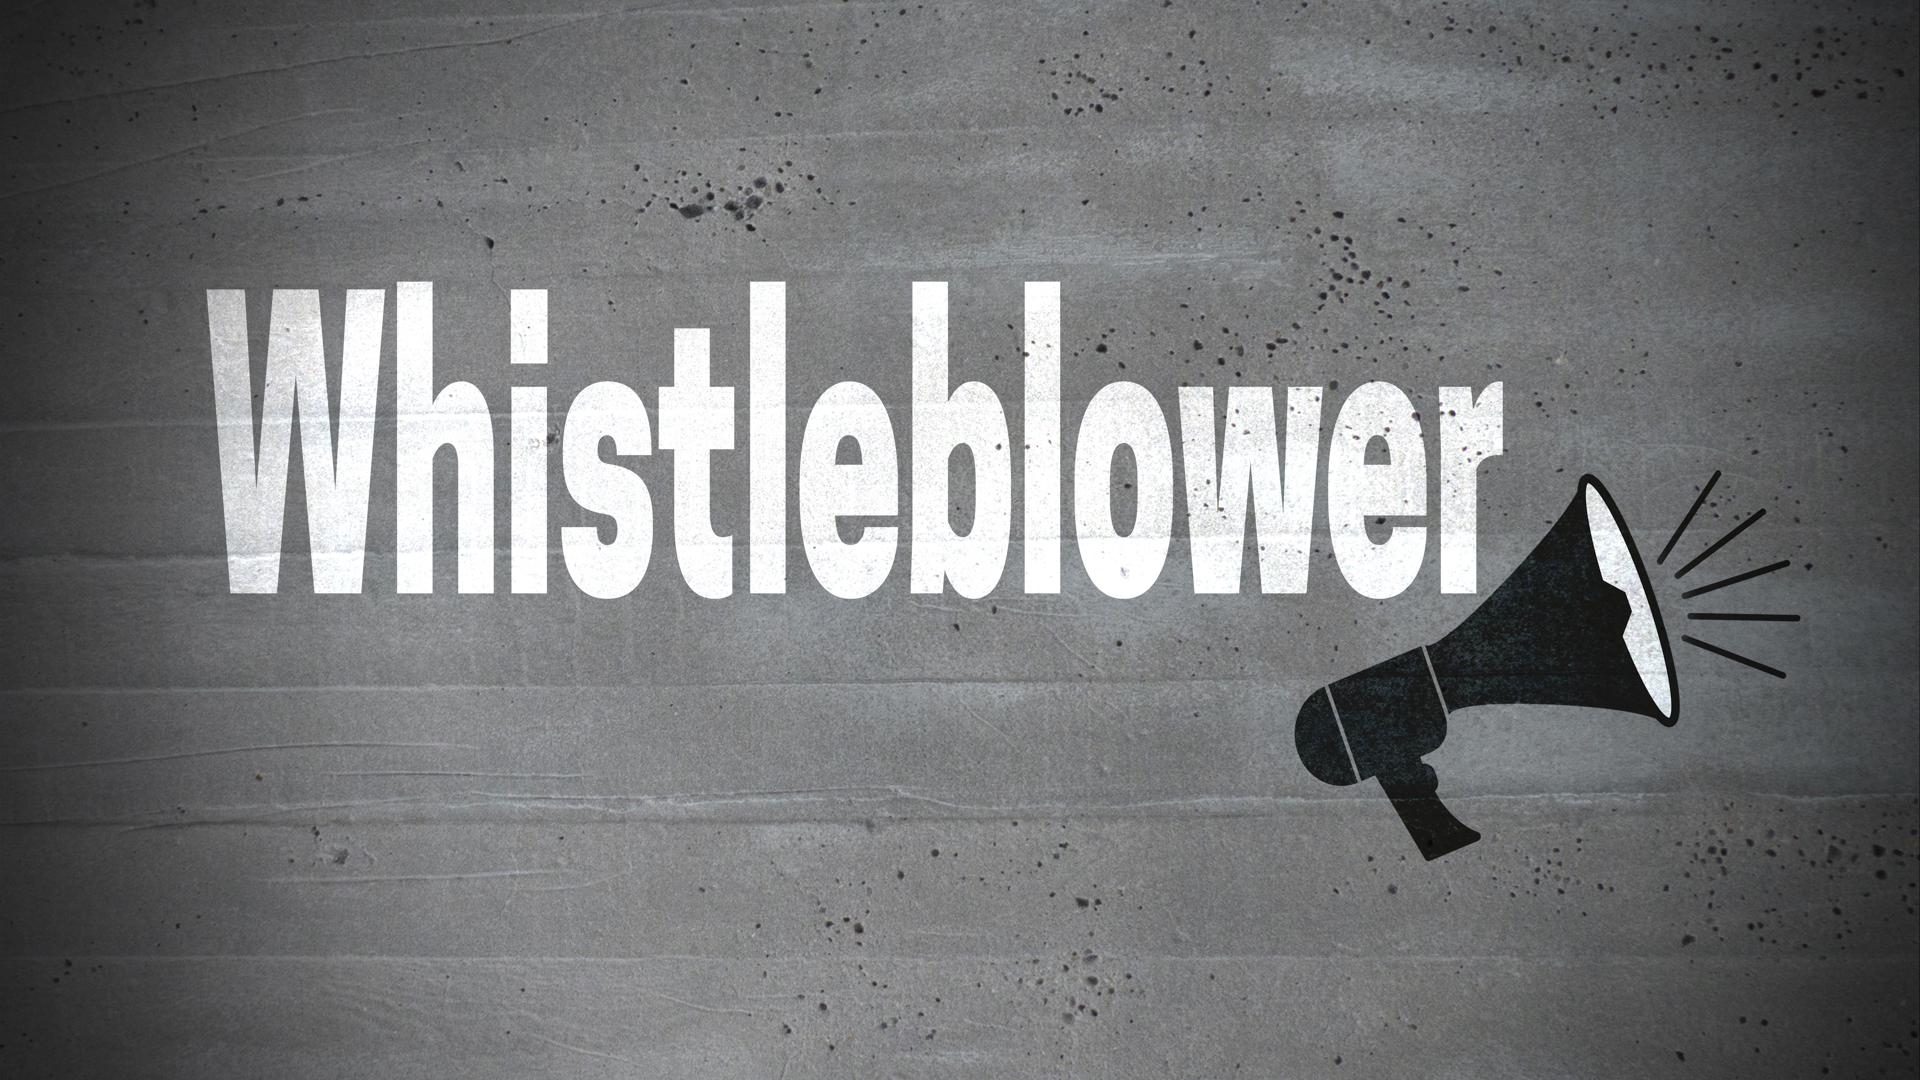 Whistleblower on concrete wall concept background